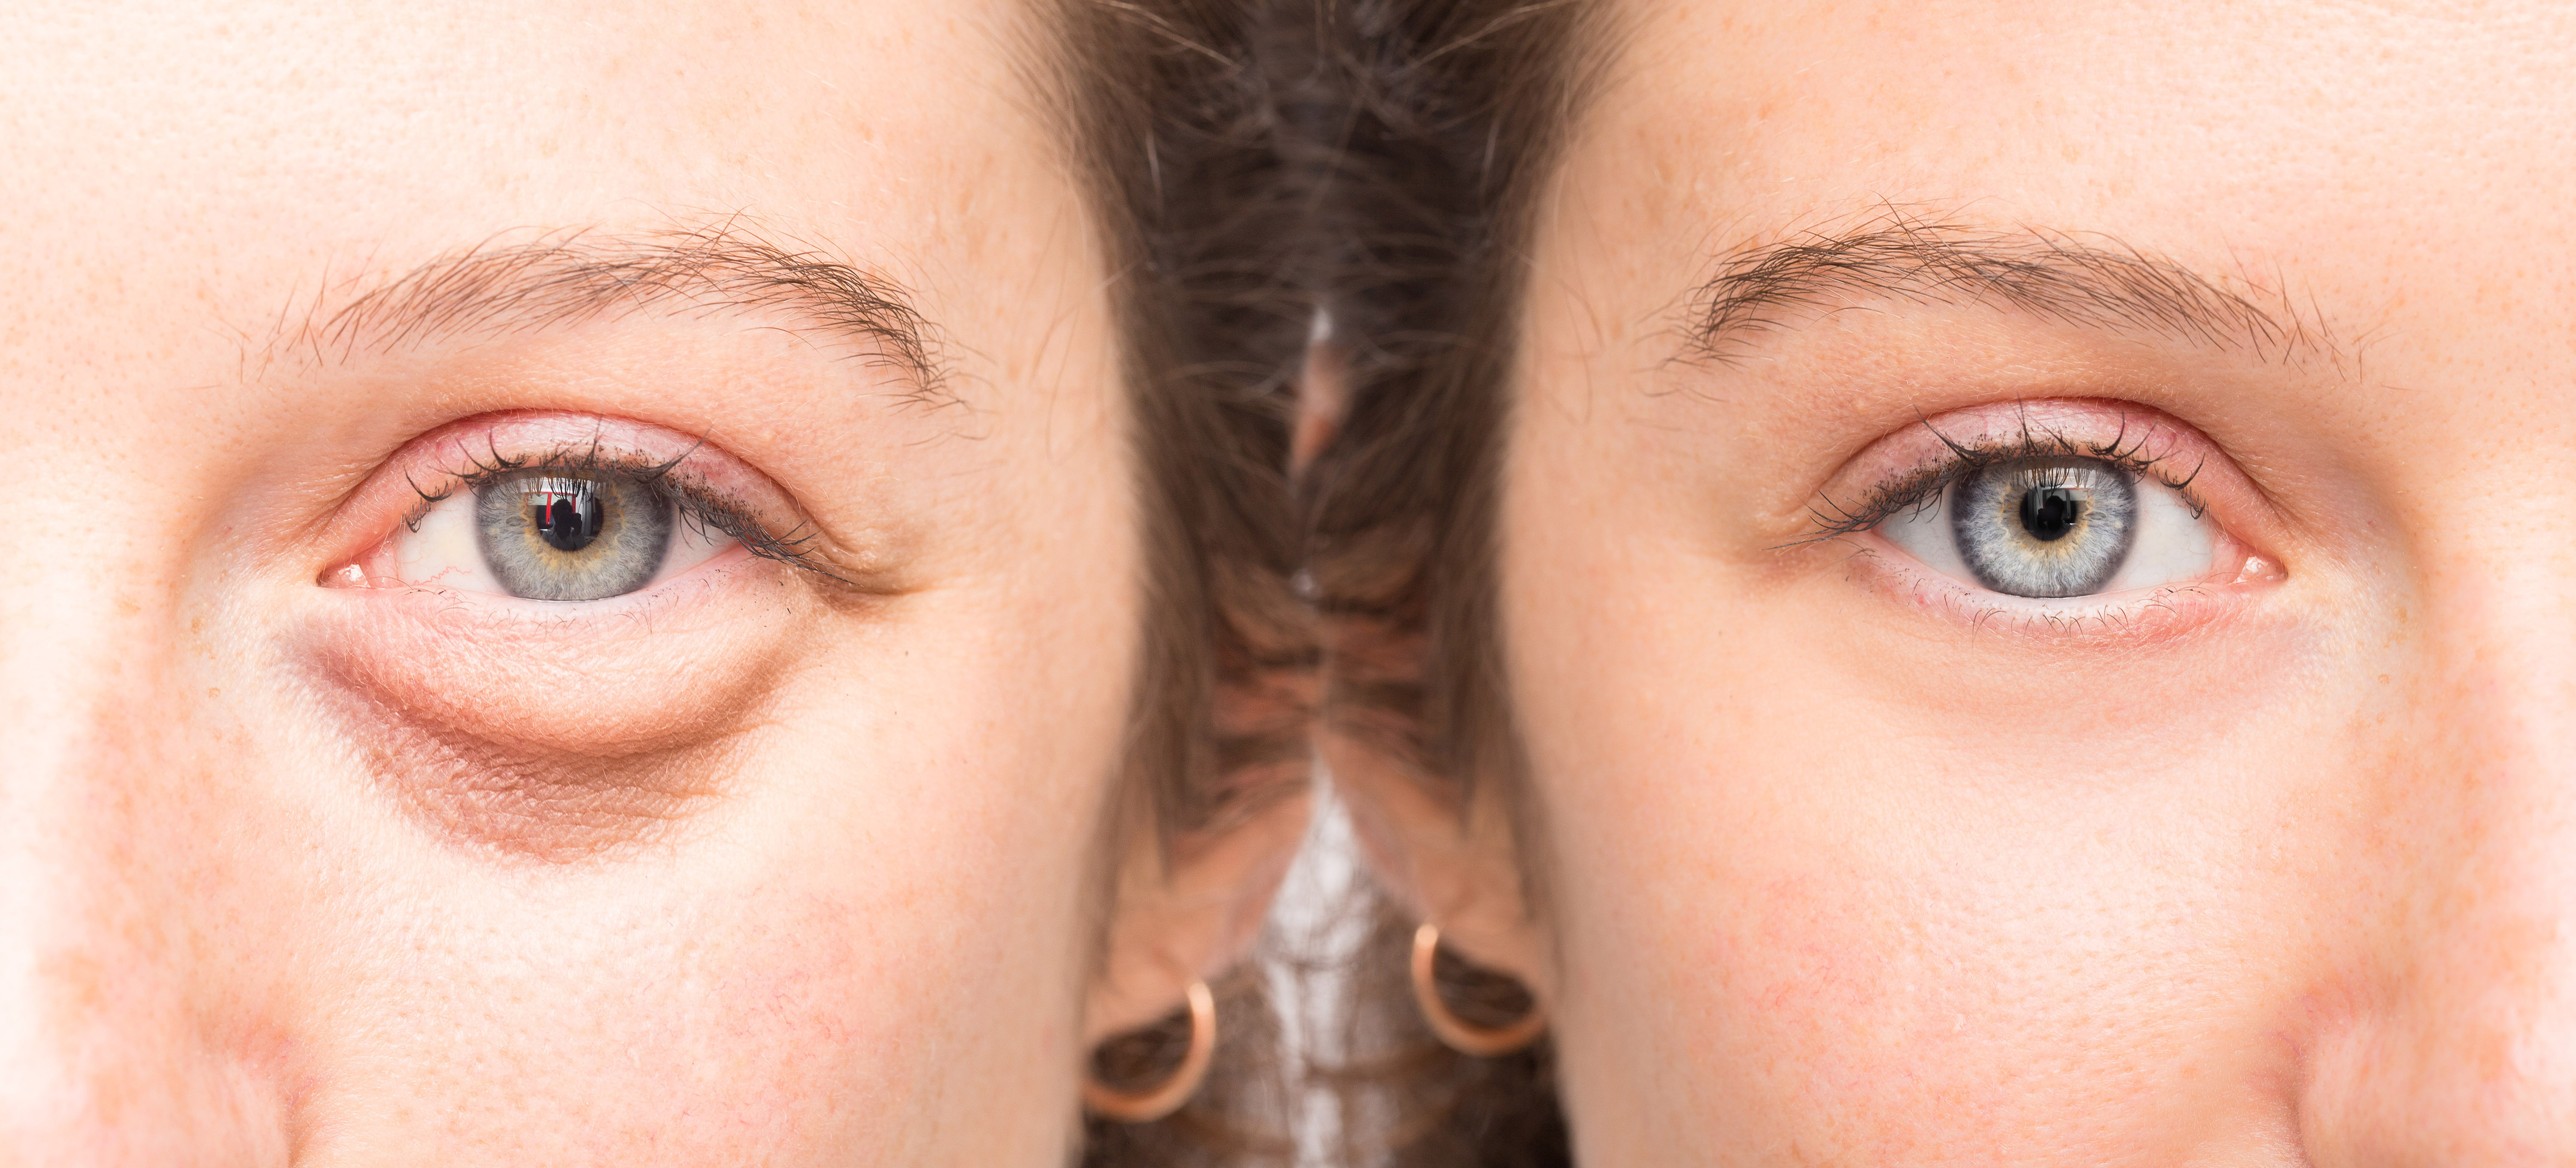 This Serum Works Like 'Magic' to Erase Wrinkles and Under-Eye Bags